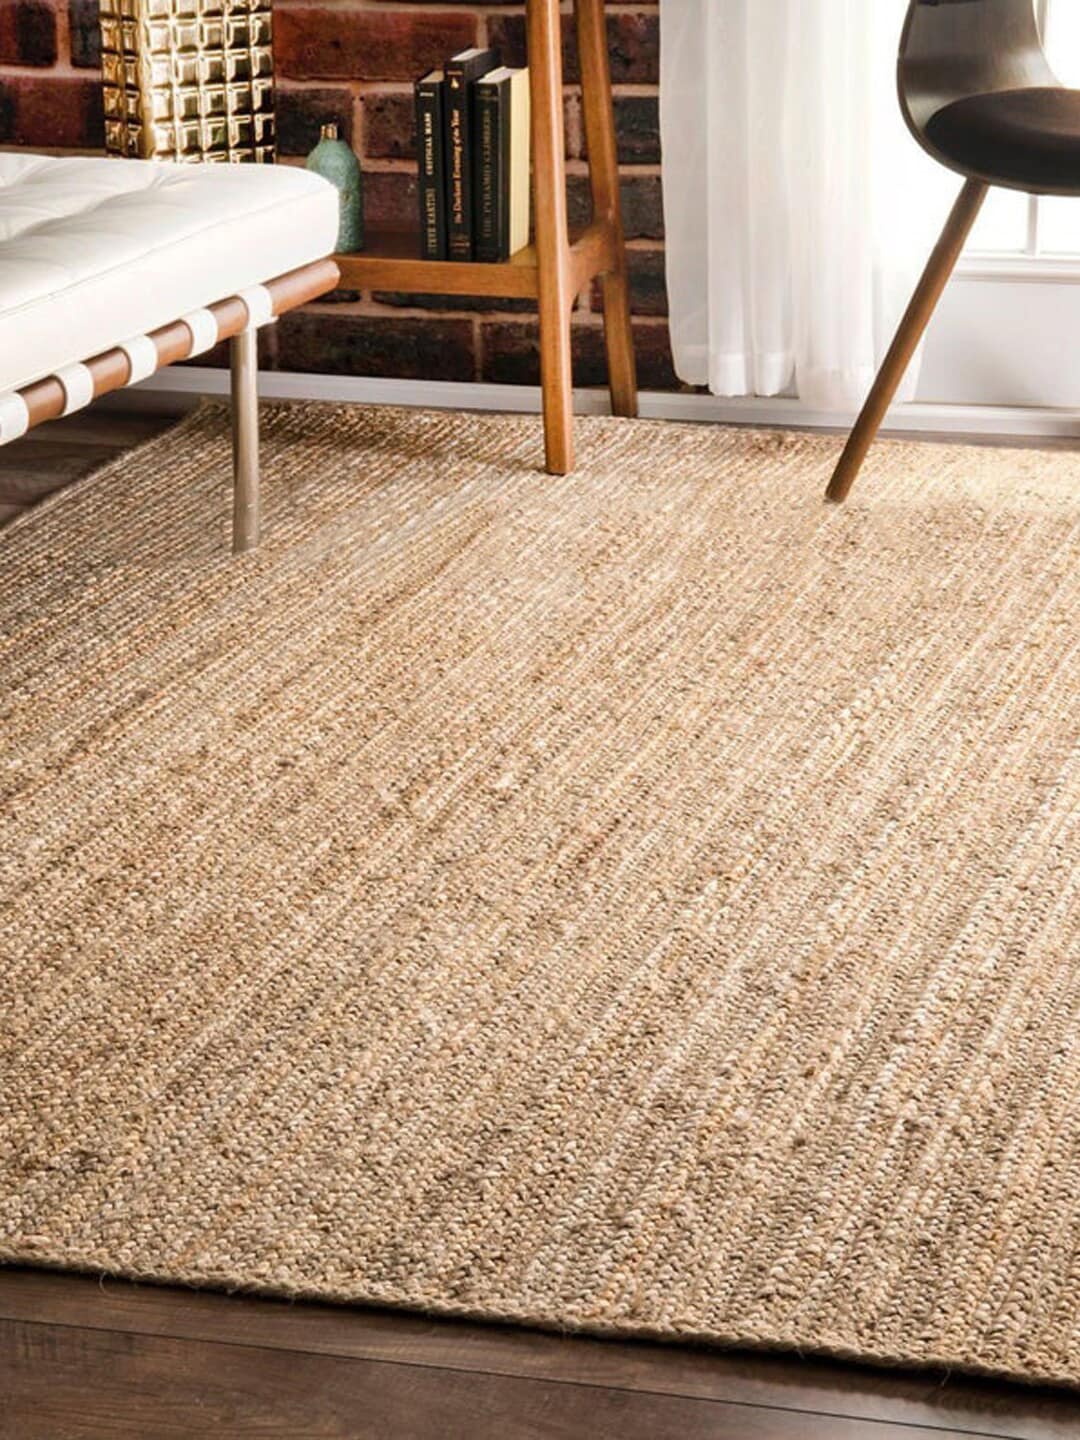 HABERE INDIA Beige Woven Jute Carpets Price in India